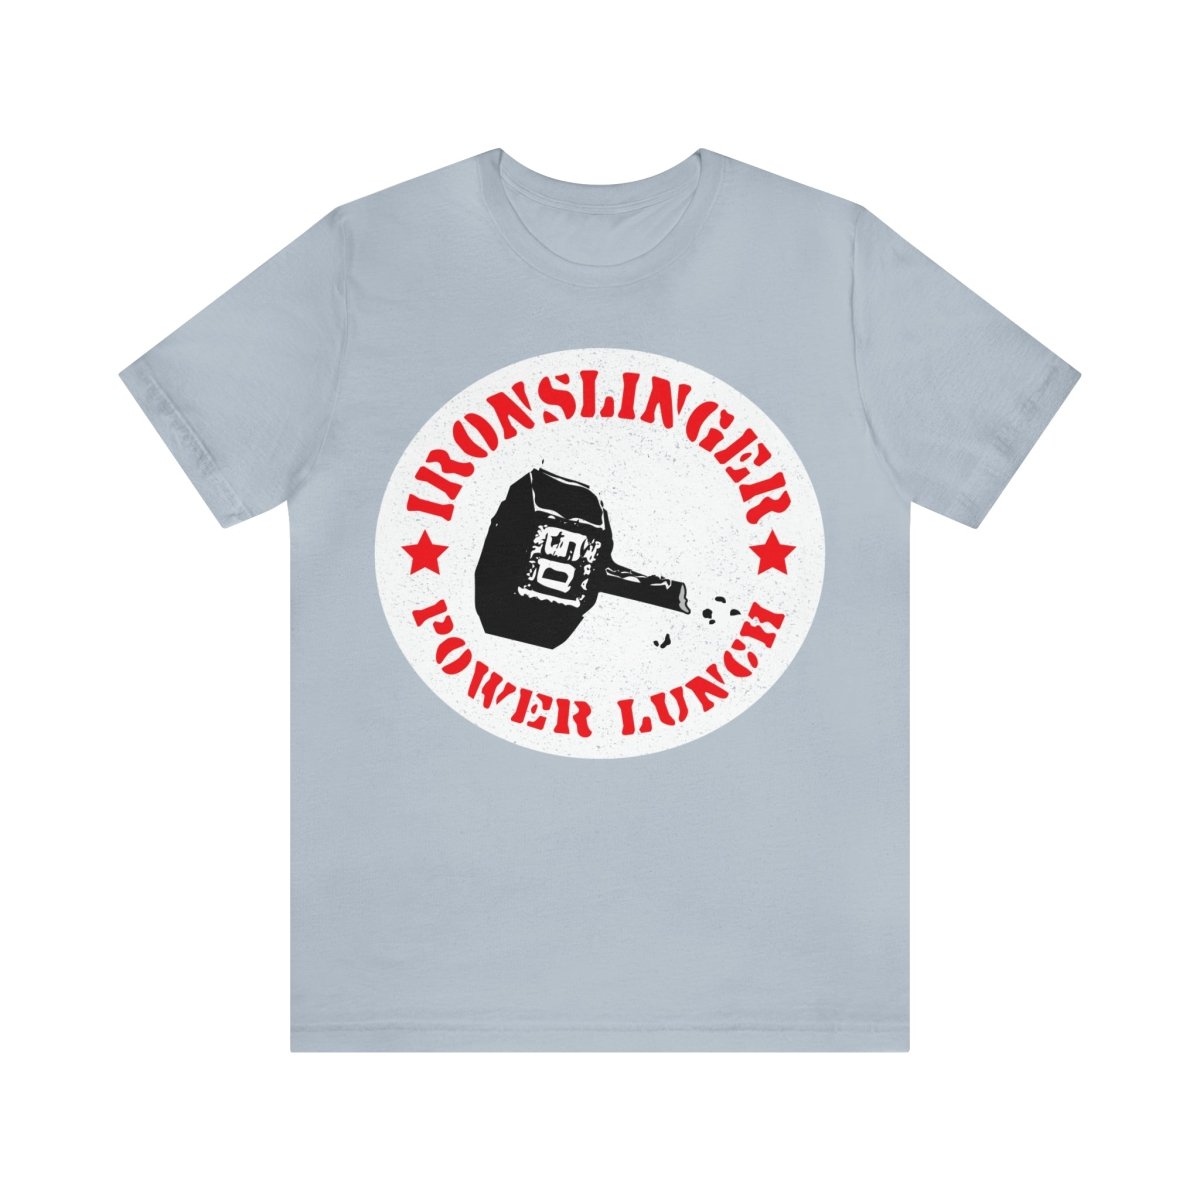 Ironslinger Power Lunch Premium T-Shirt, Weightlifter, Muscle Shirt, Powerlifting Gift, Strong Man Gift, Gym Clothes, Funny